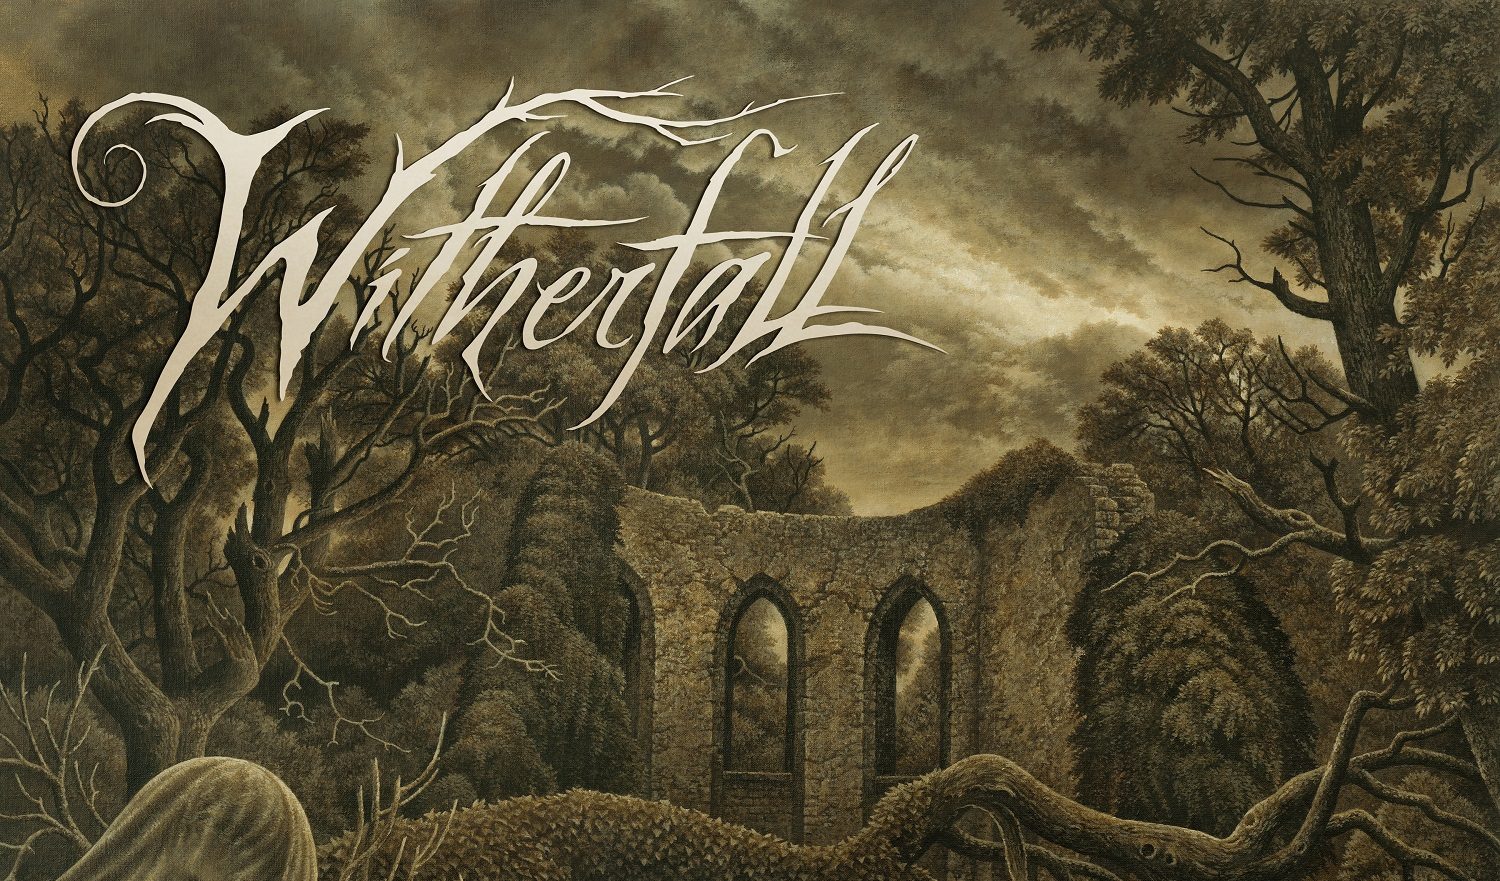 WITHERFALL - Nocturnes and Requiems